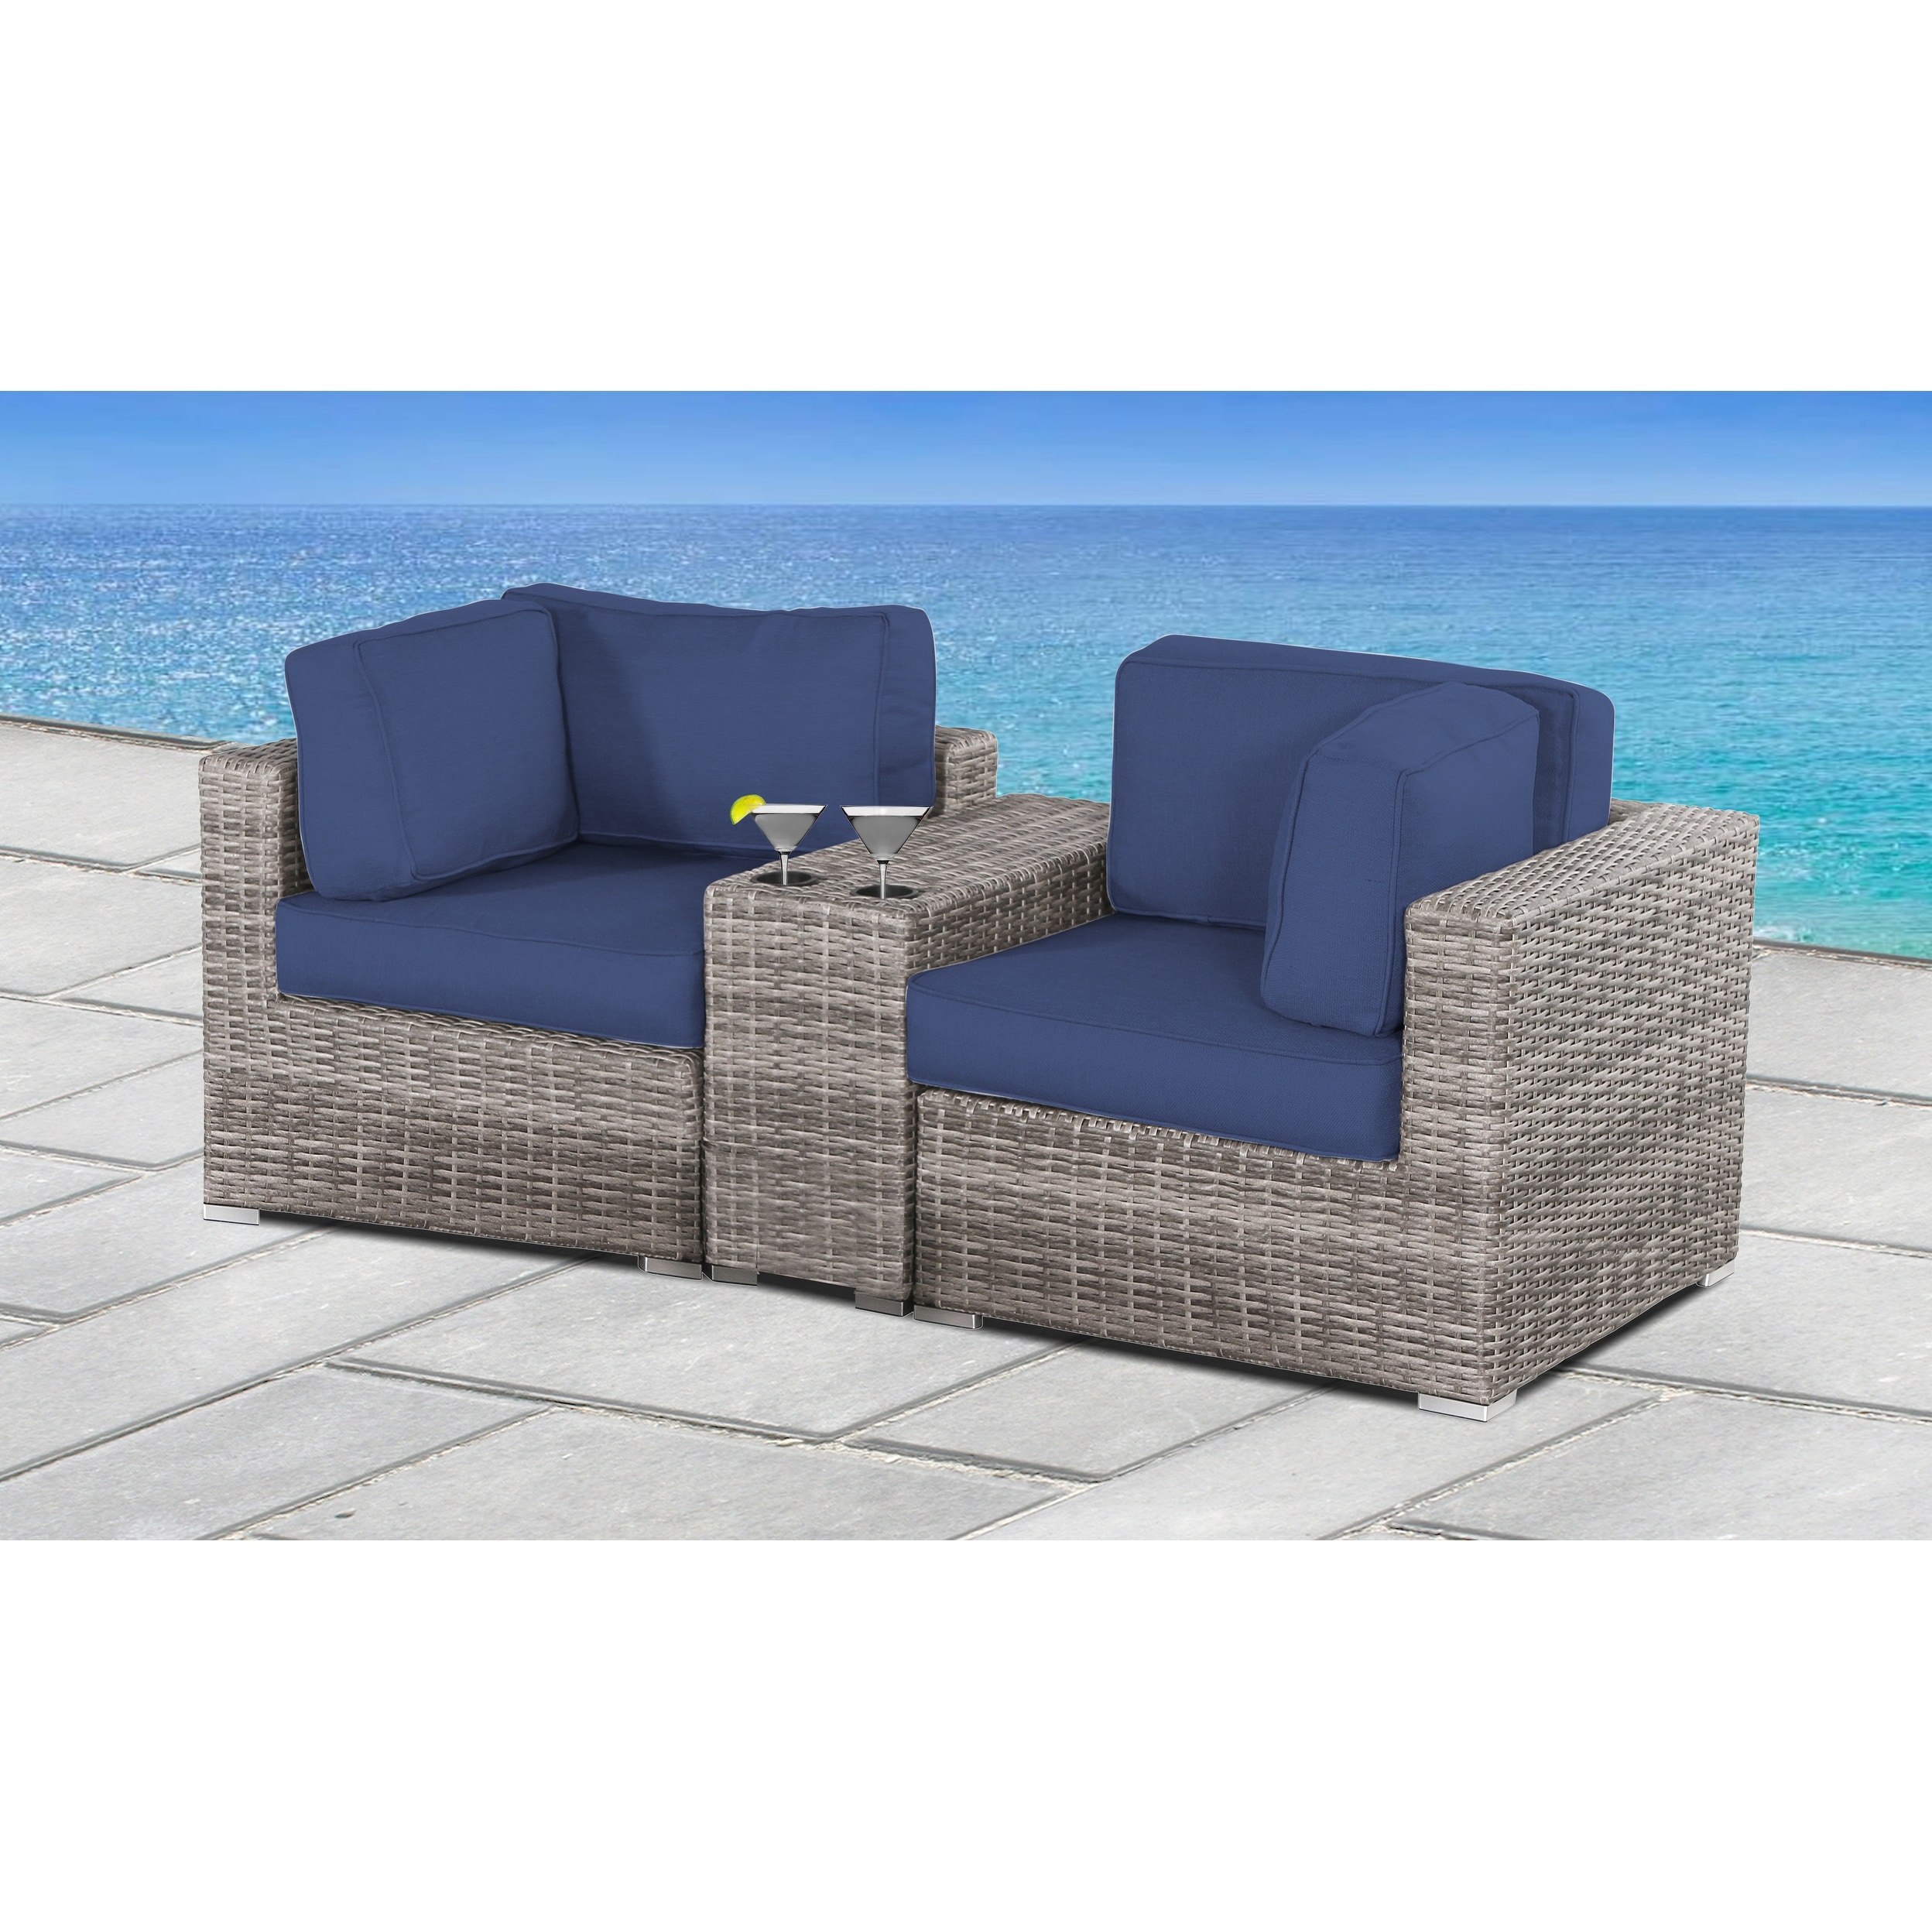 Outdoor 3 Piece Wicker Loveseat With Cushions